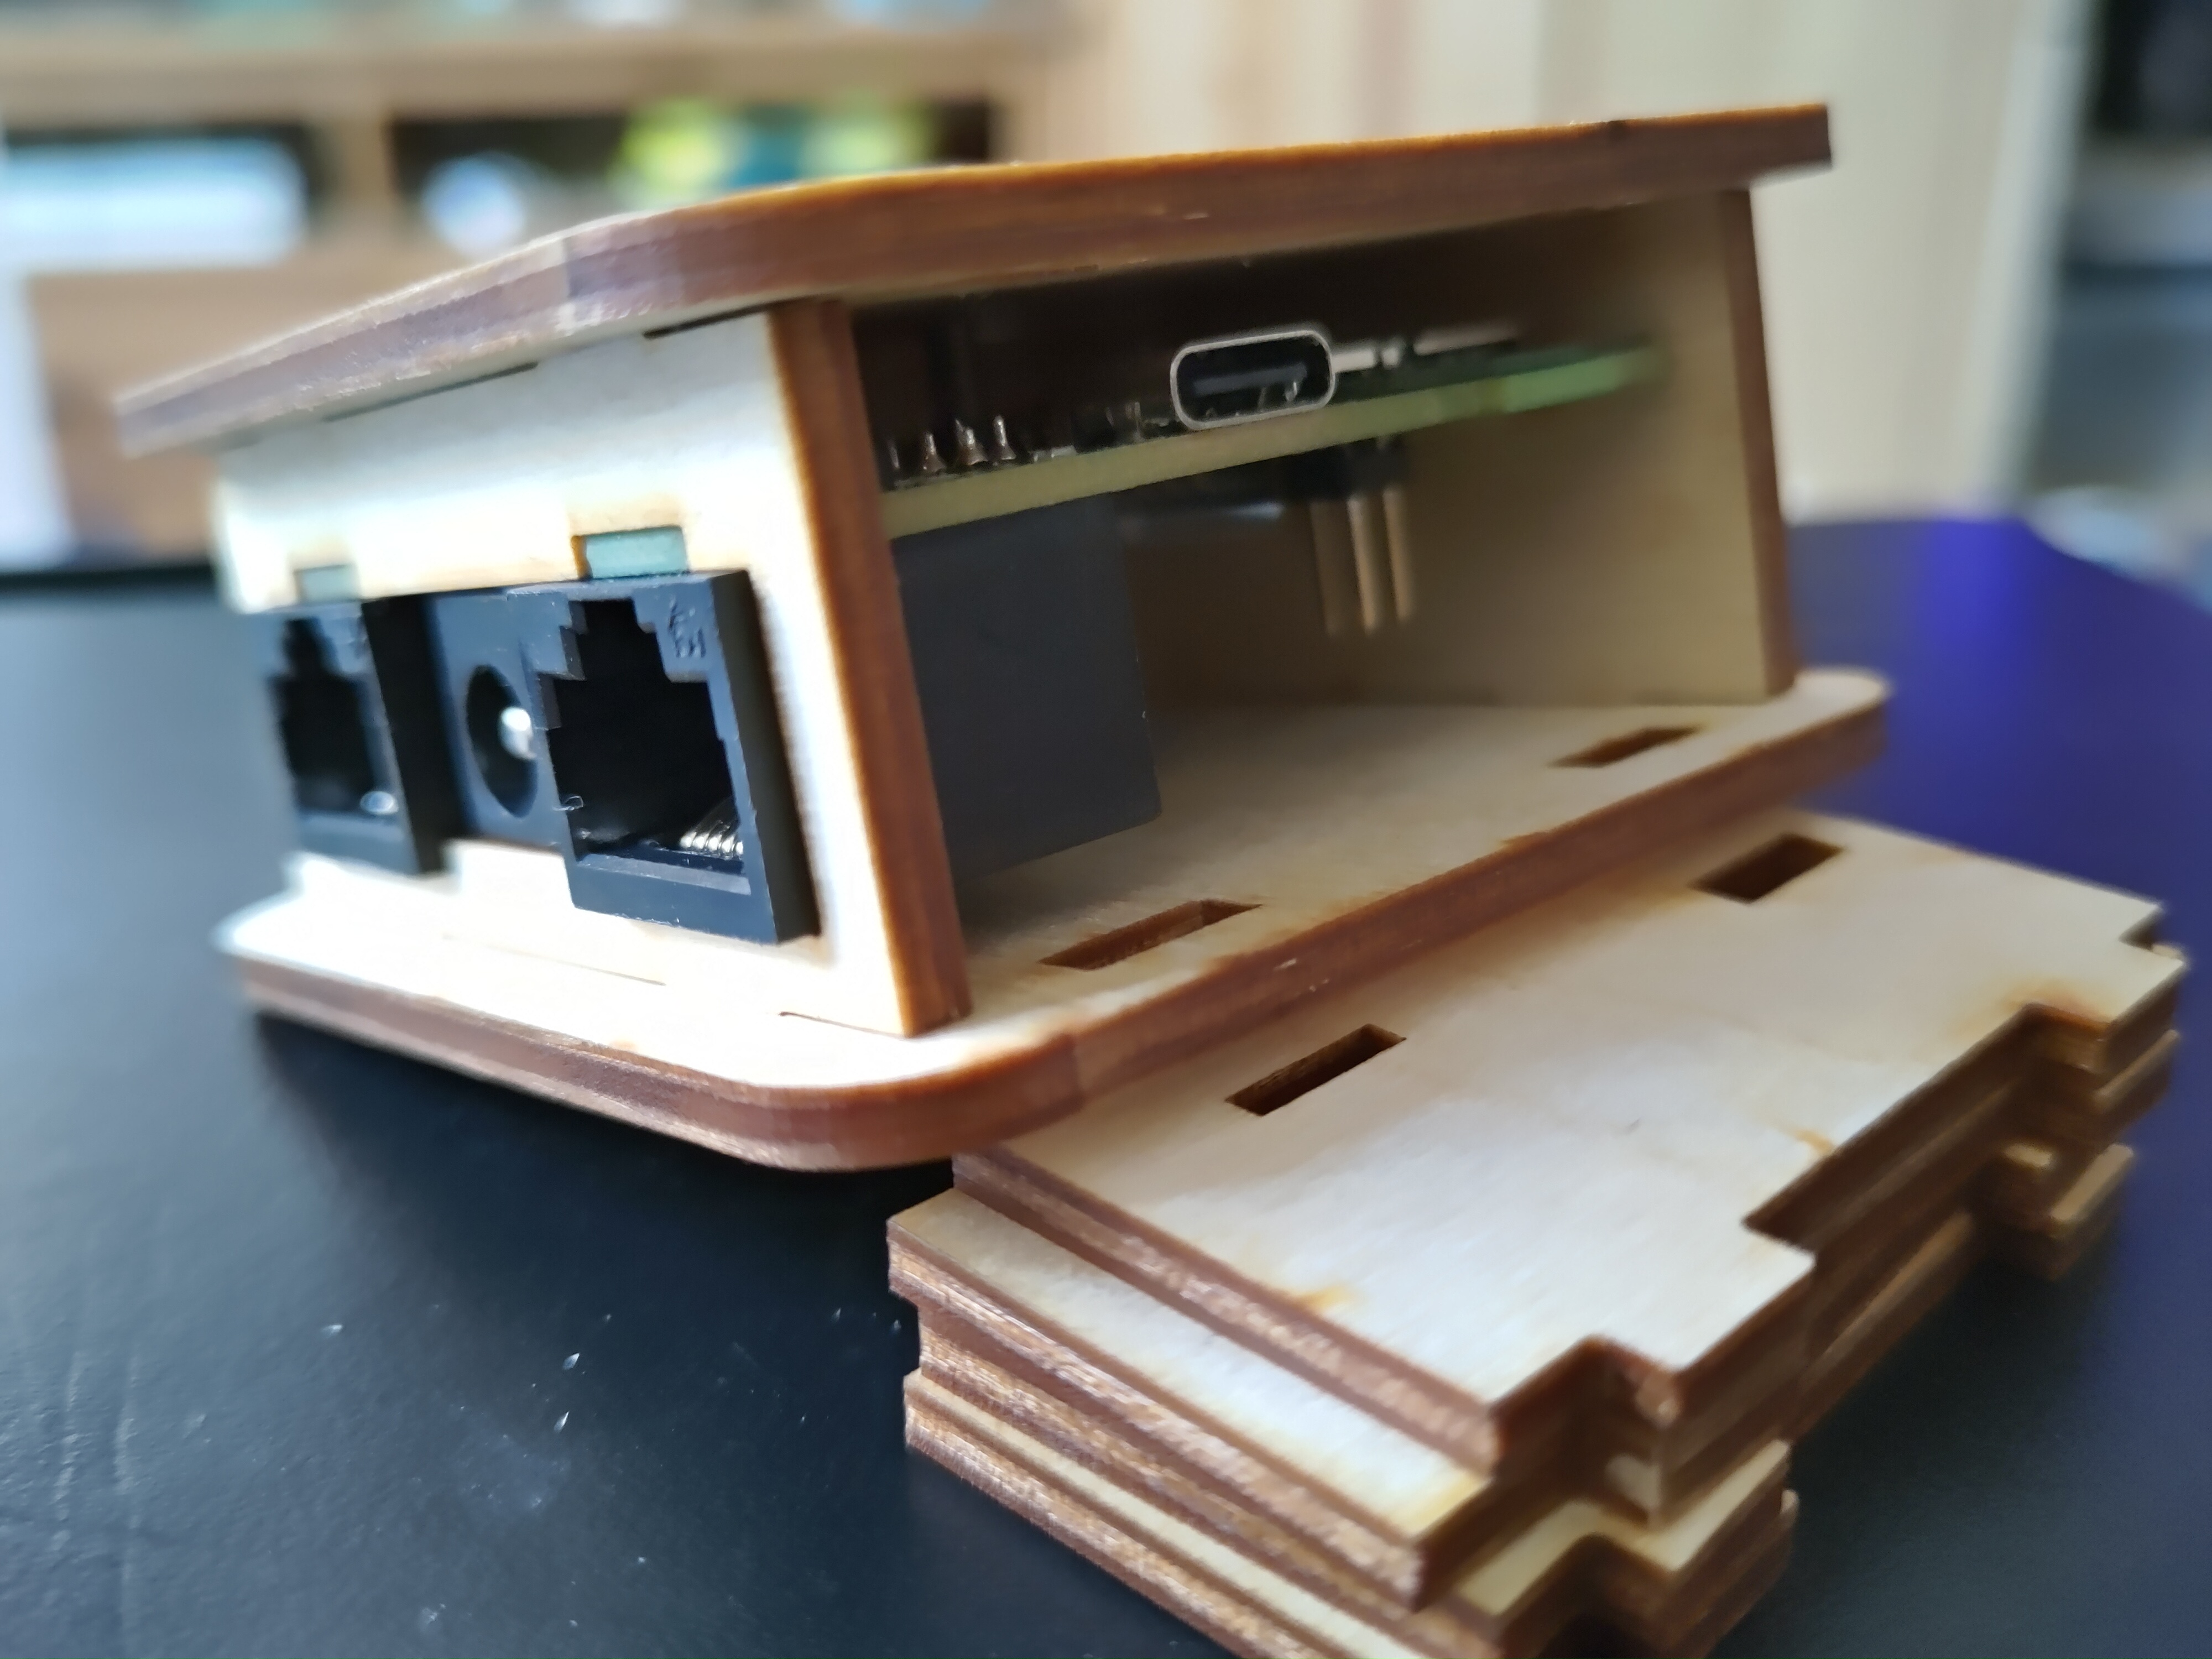 A partially assembled laser cut case, with a PCB mounted inside it